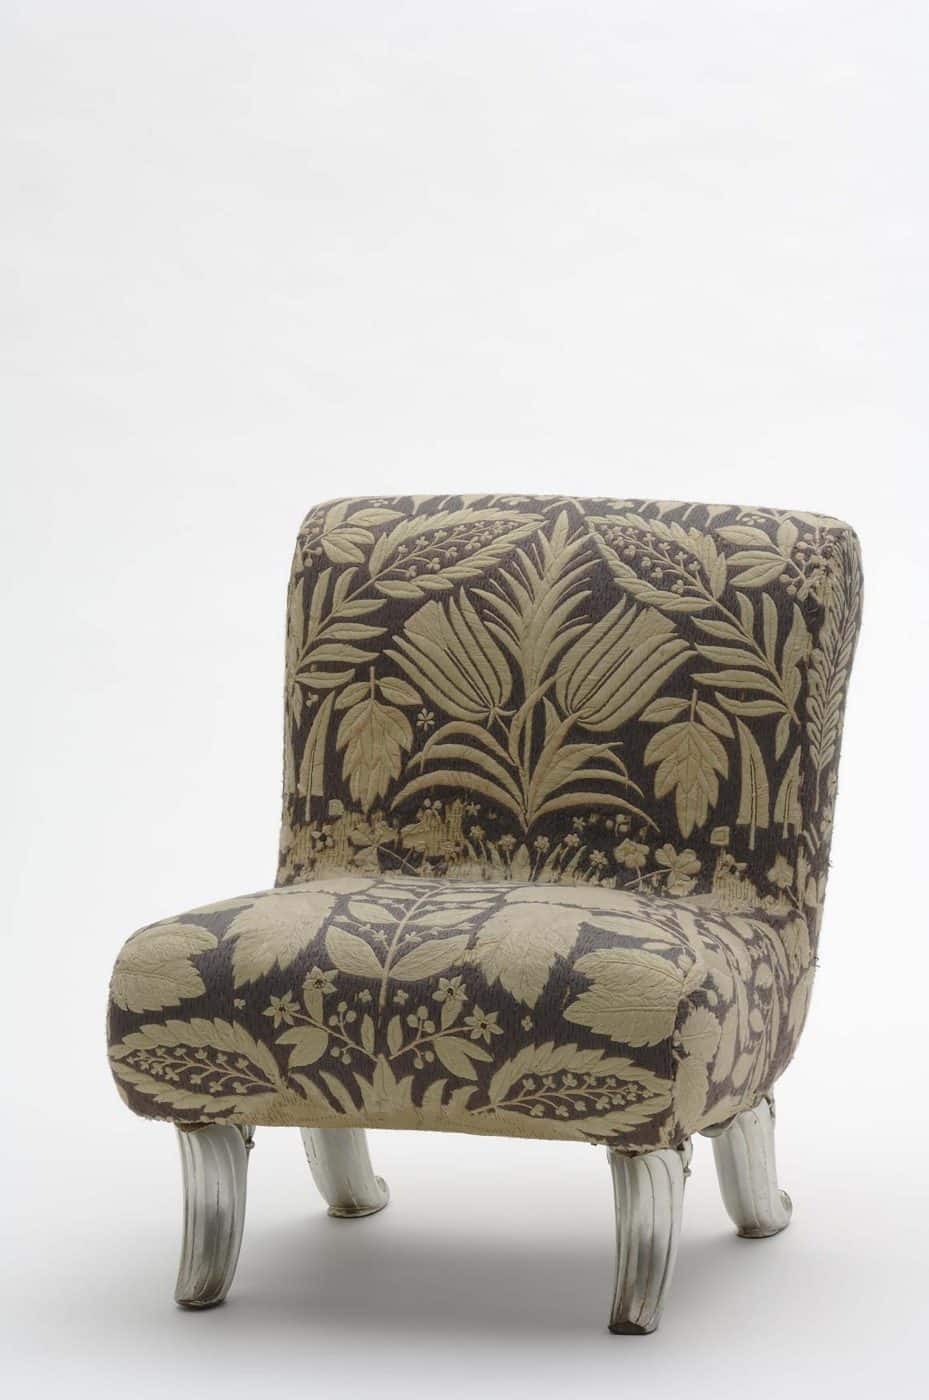 The slipper chair with upholstery embroidered by Hedwig Pöchlmüller